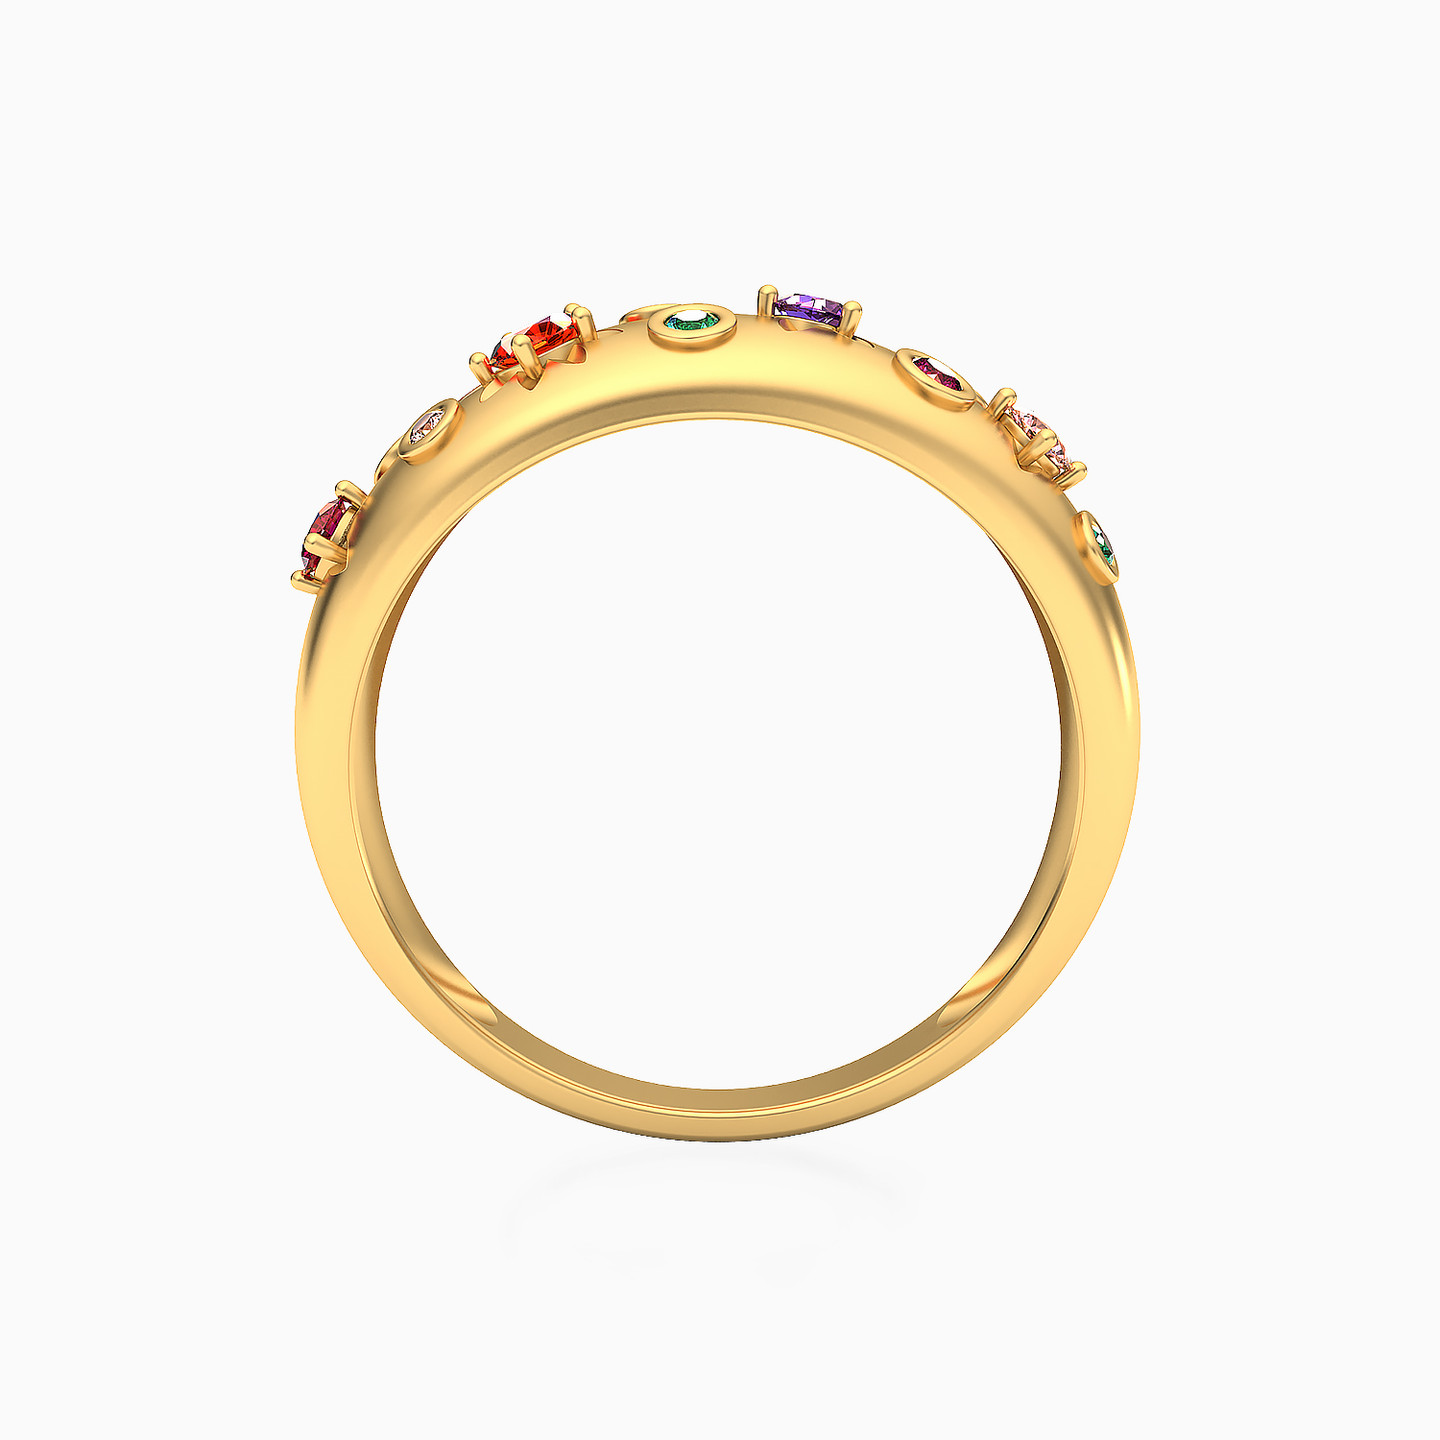 18K Gold Colored Stones Statement Ring - 3